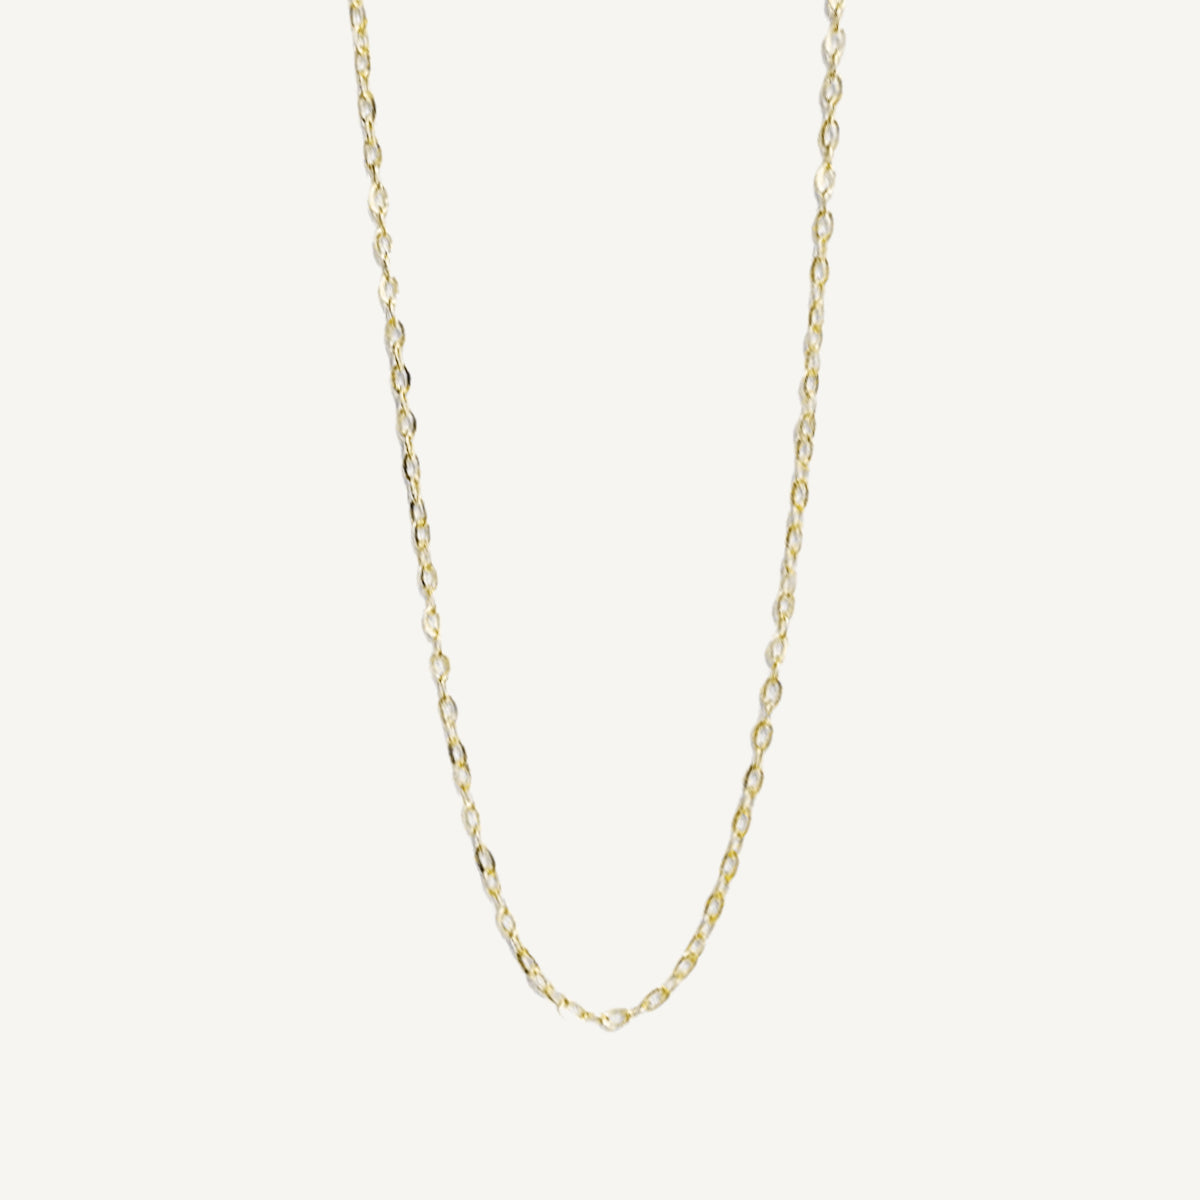 The Barely There Ultra Thin Necklace in Solid Gold